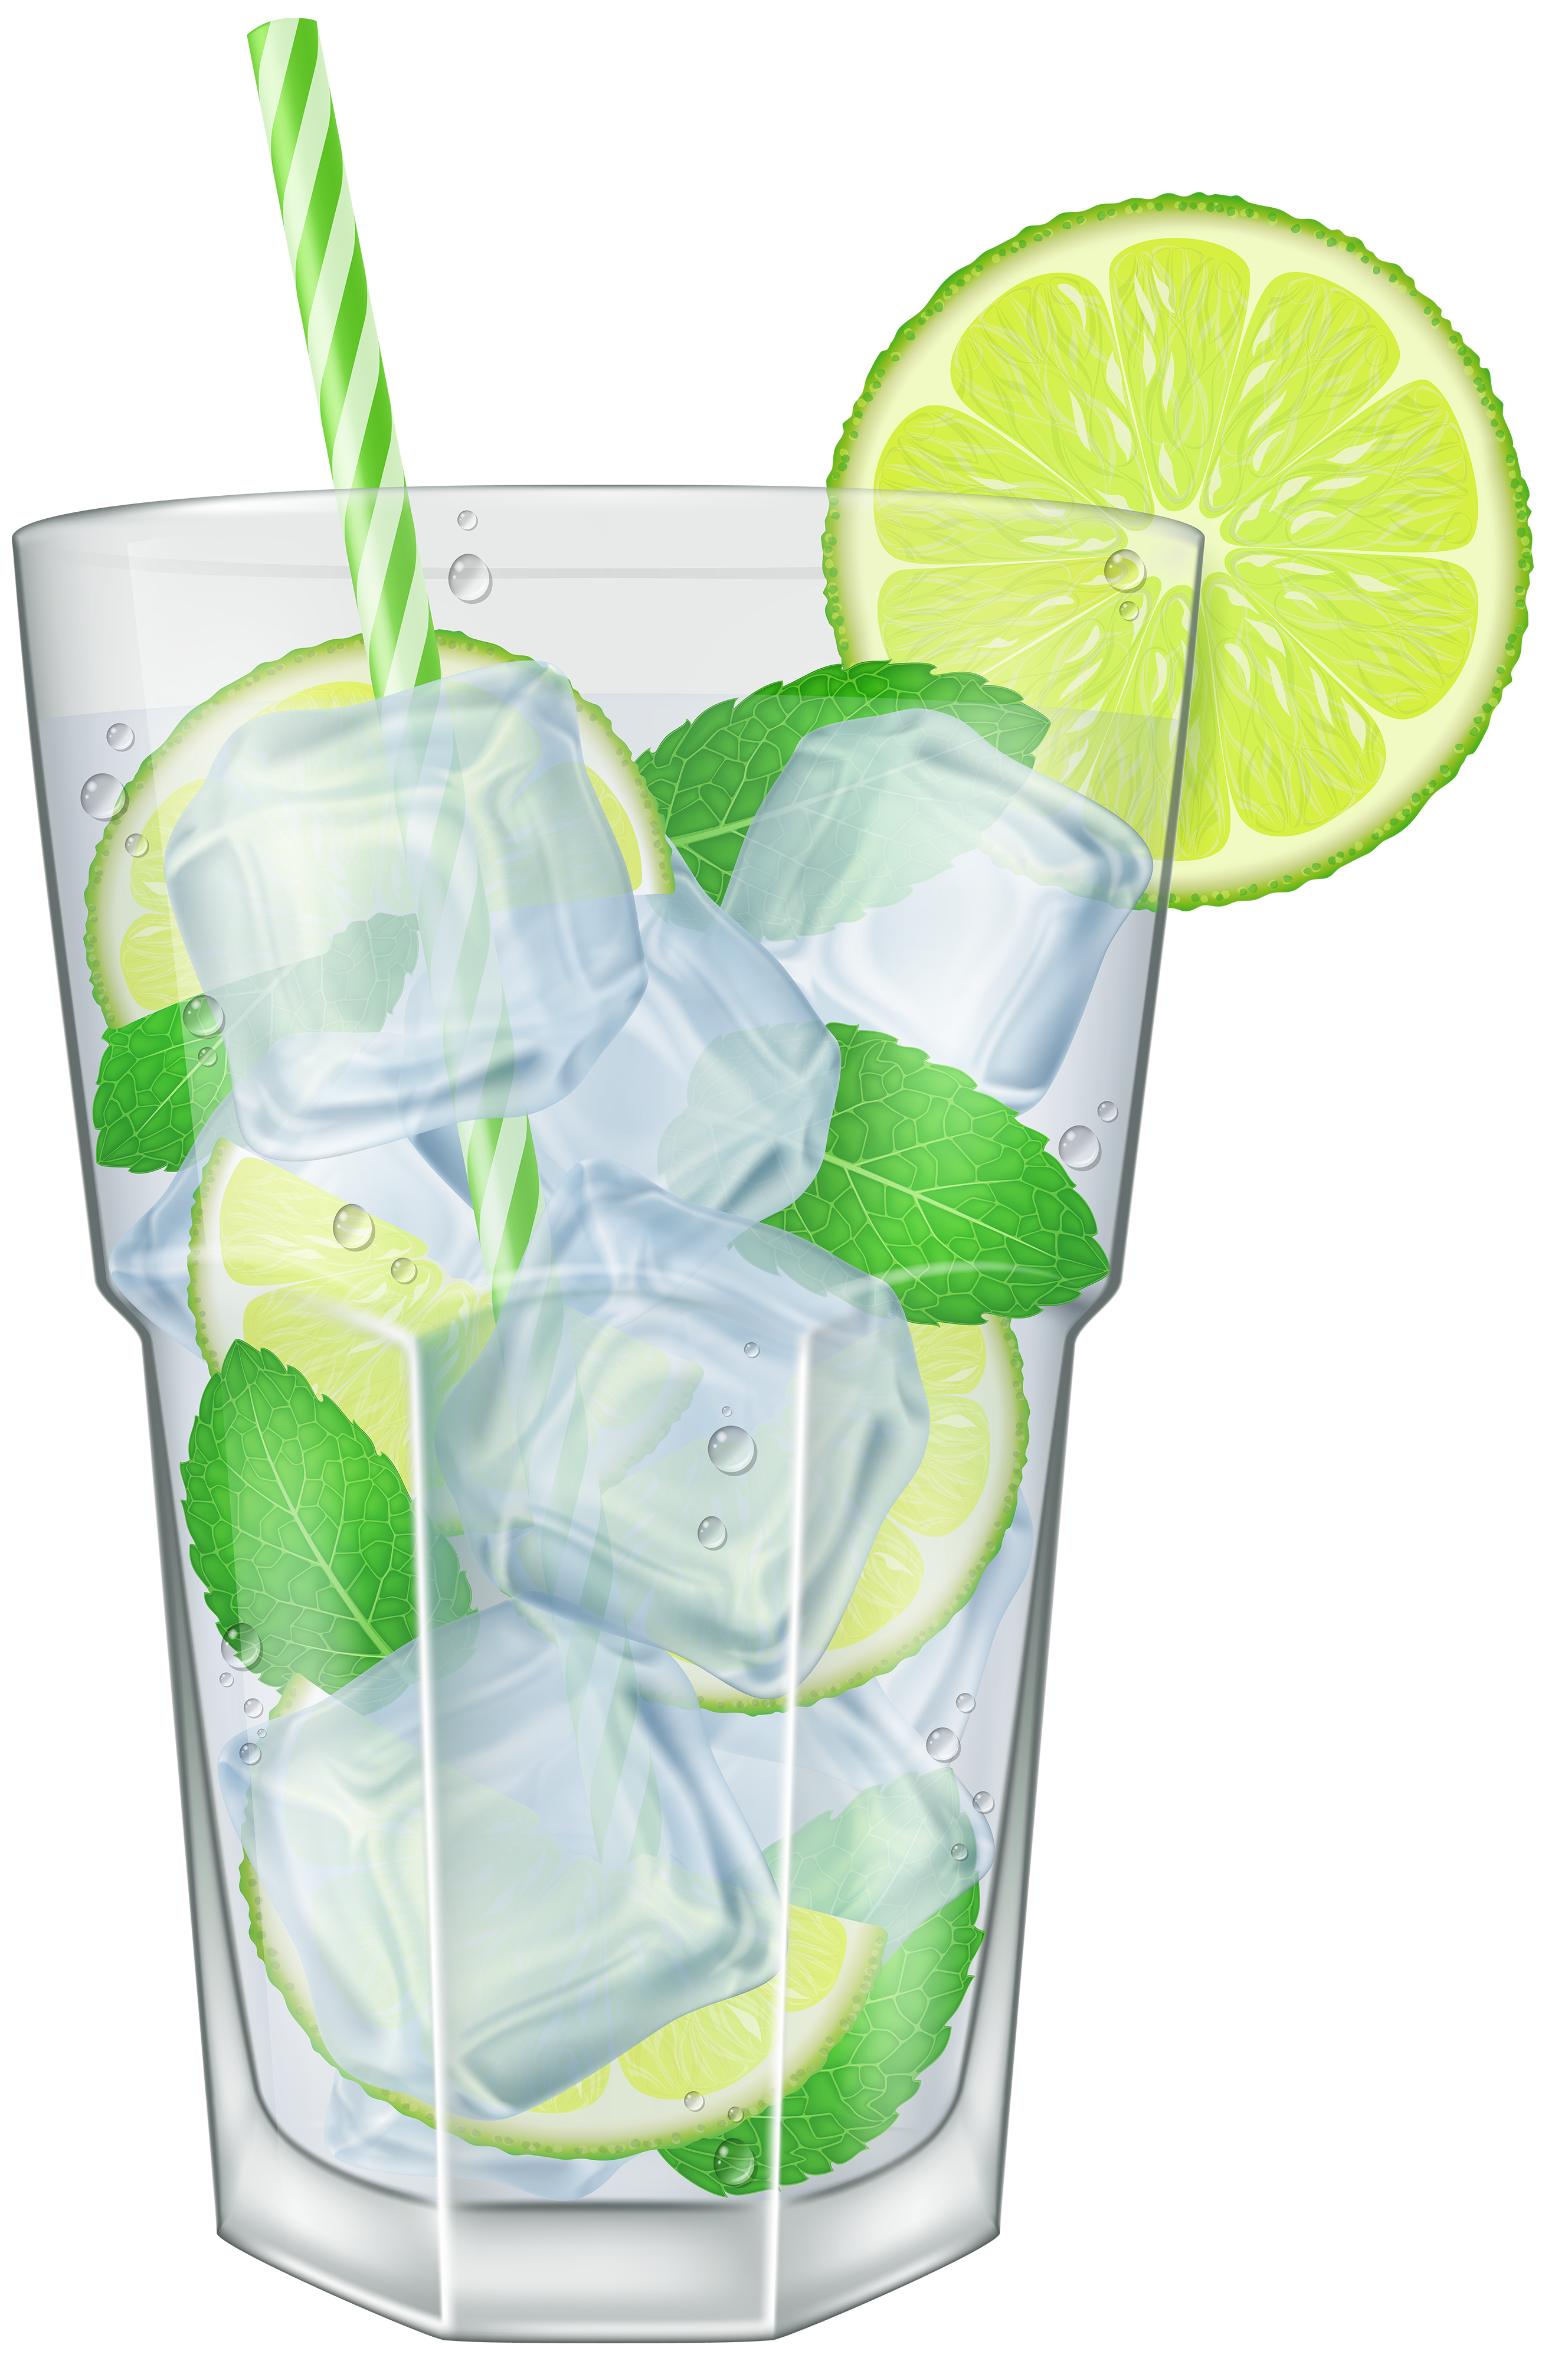 Mojito Cocktail Png Clip Art Image Gallery Yopriceville High Quality Images And Transparent Png Free Clipart